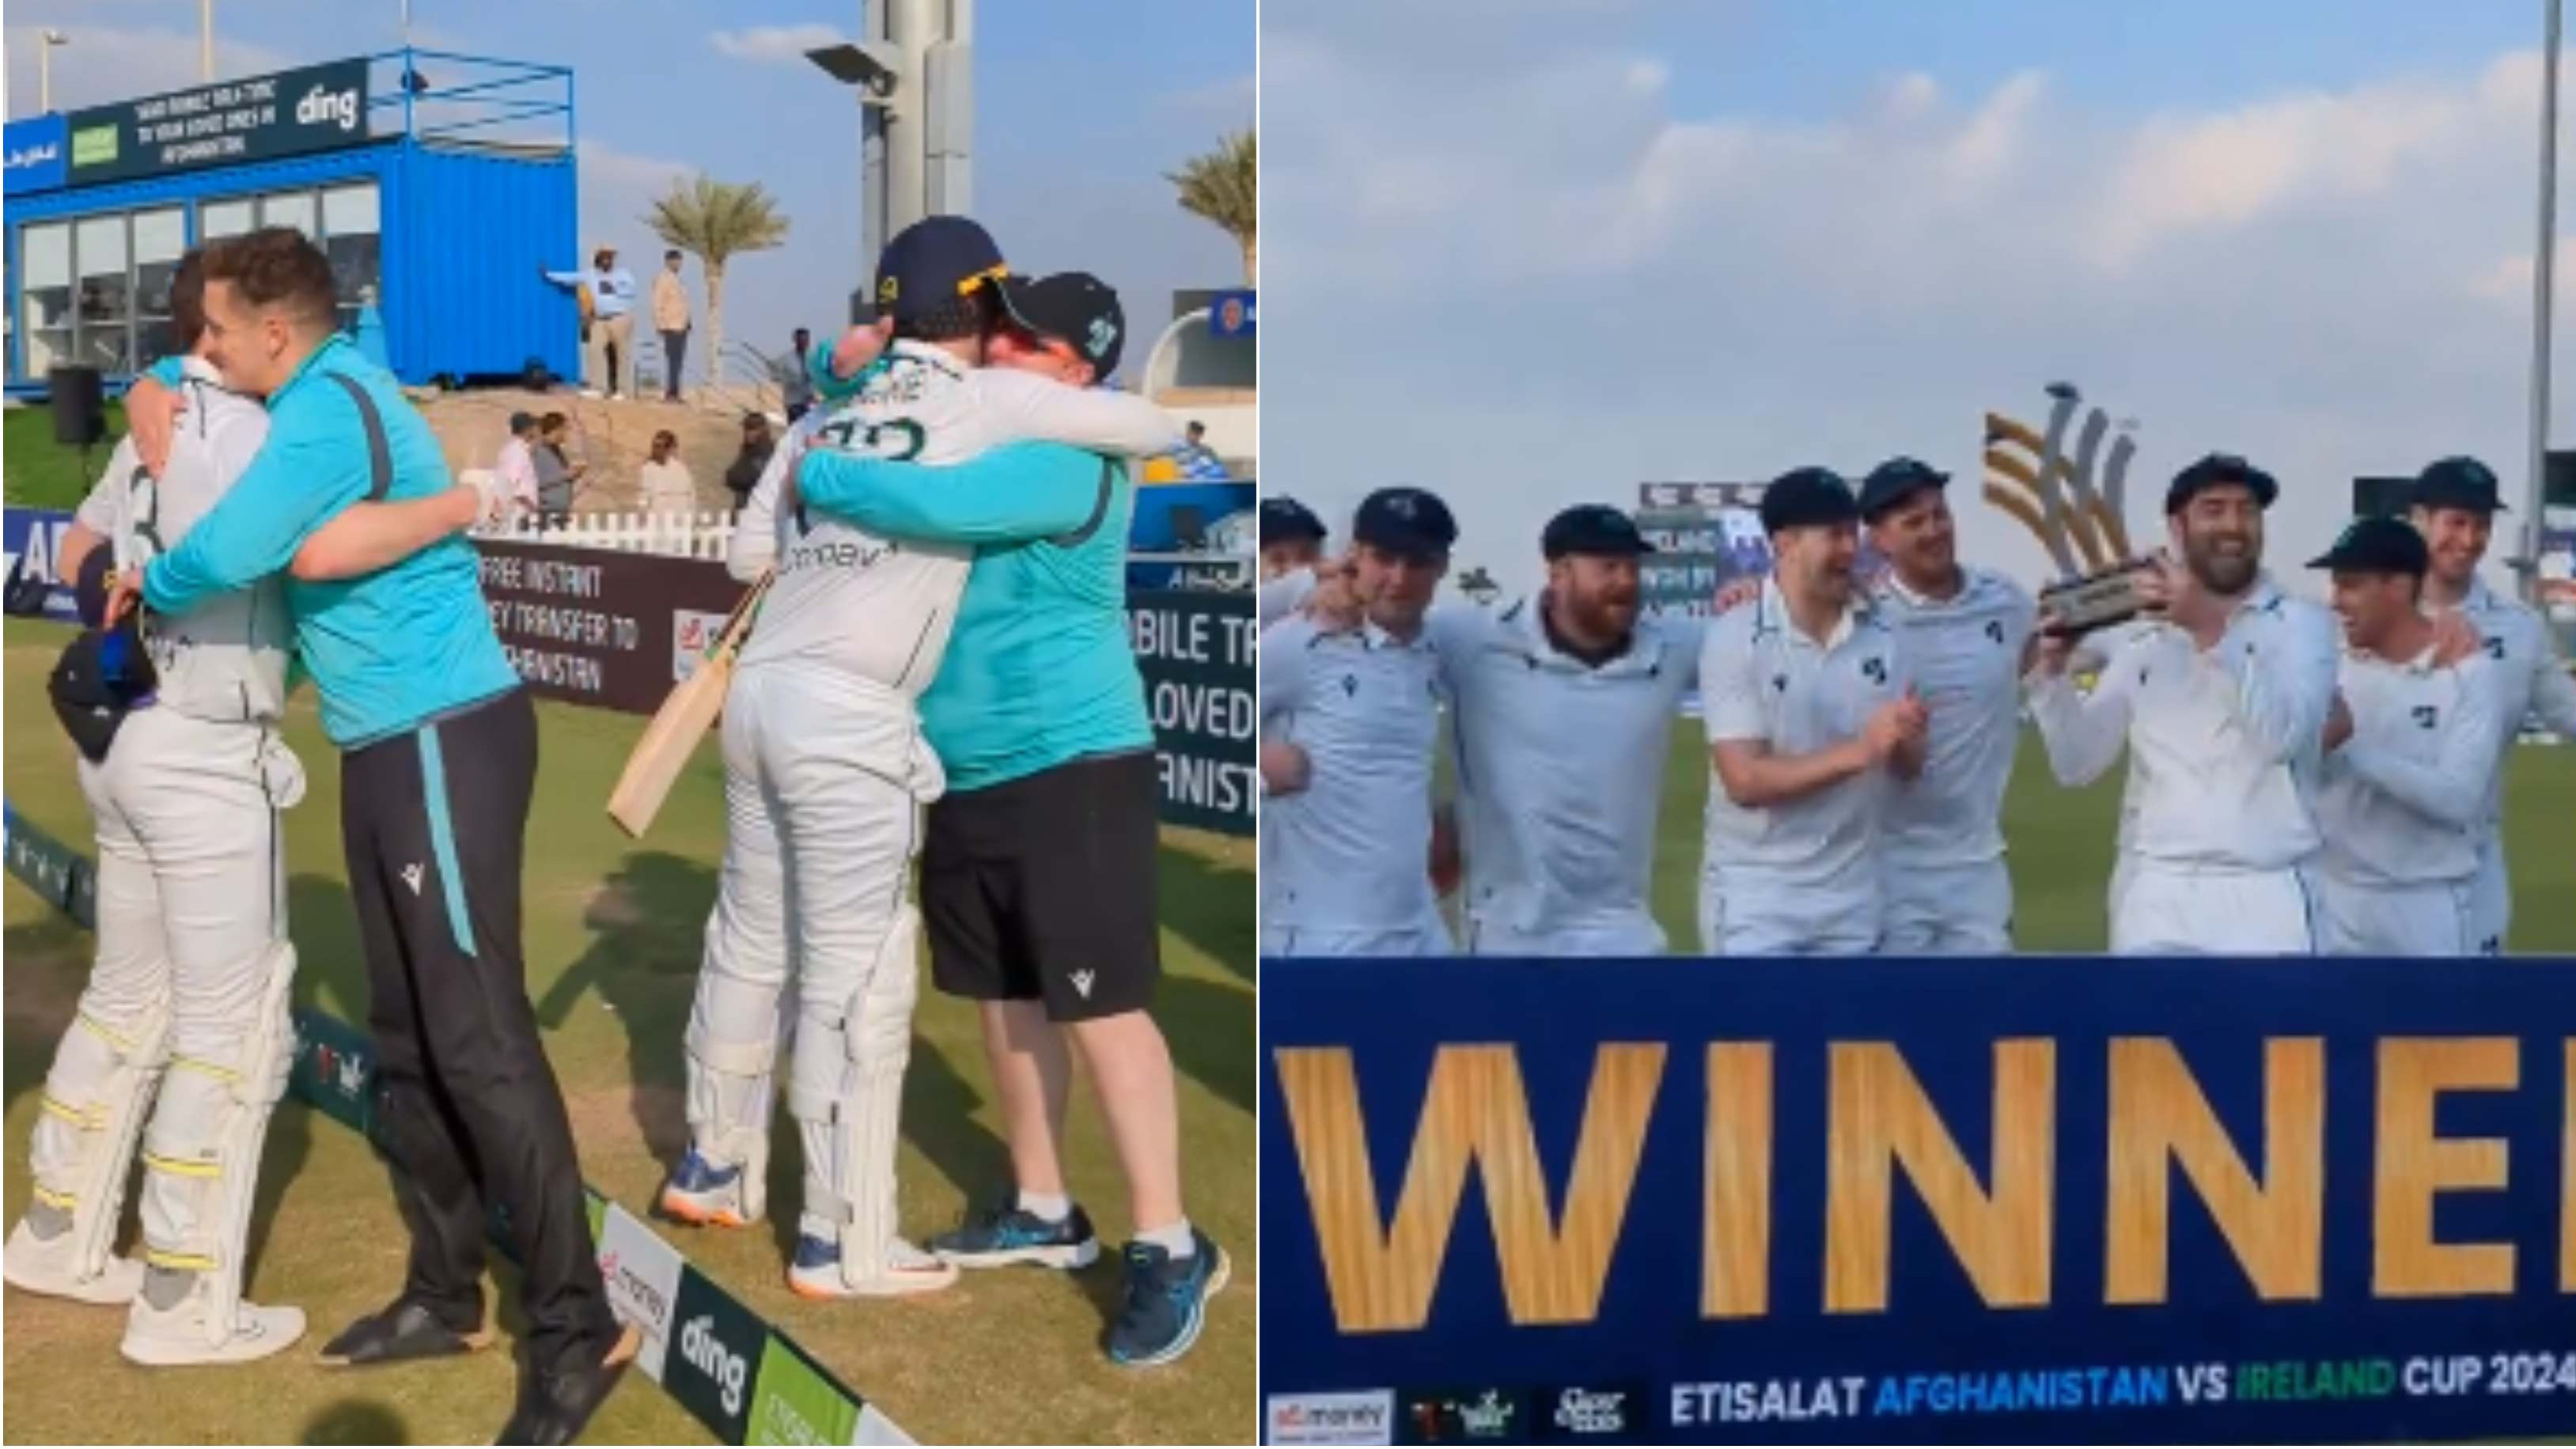 WATCH: Ireland players erupt in joy after securing historic maiden Test win against Afghanistan